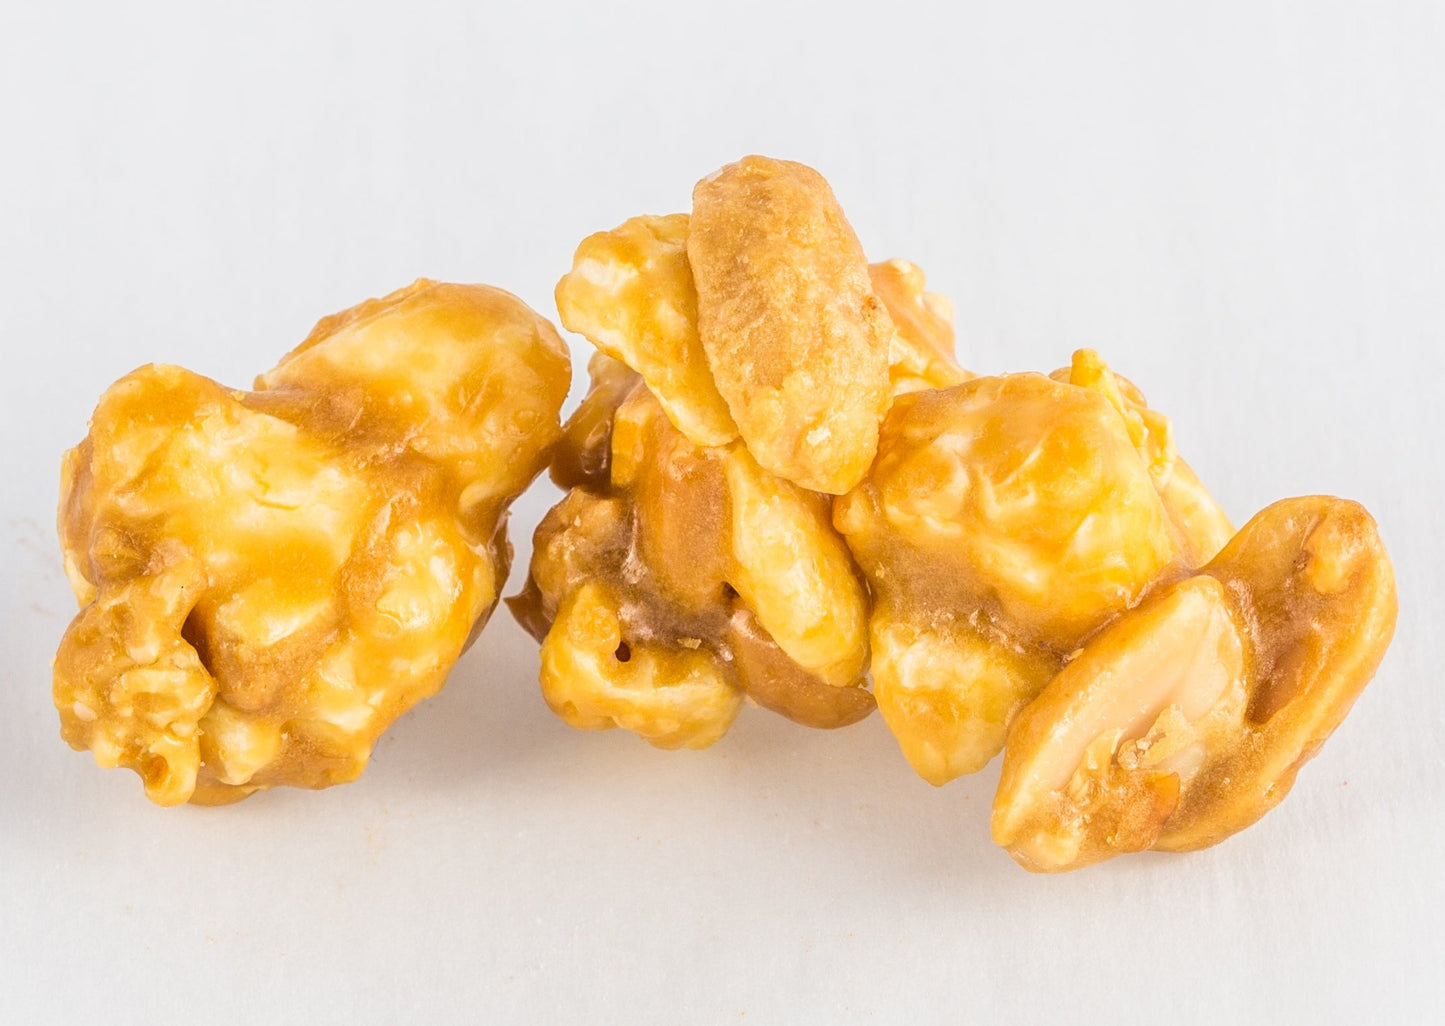 Four kernels of popped popcorn with caramel and peanuts.